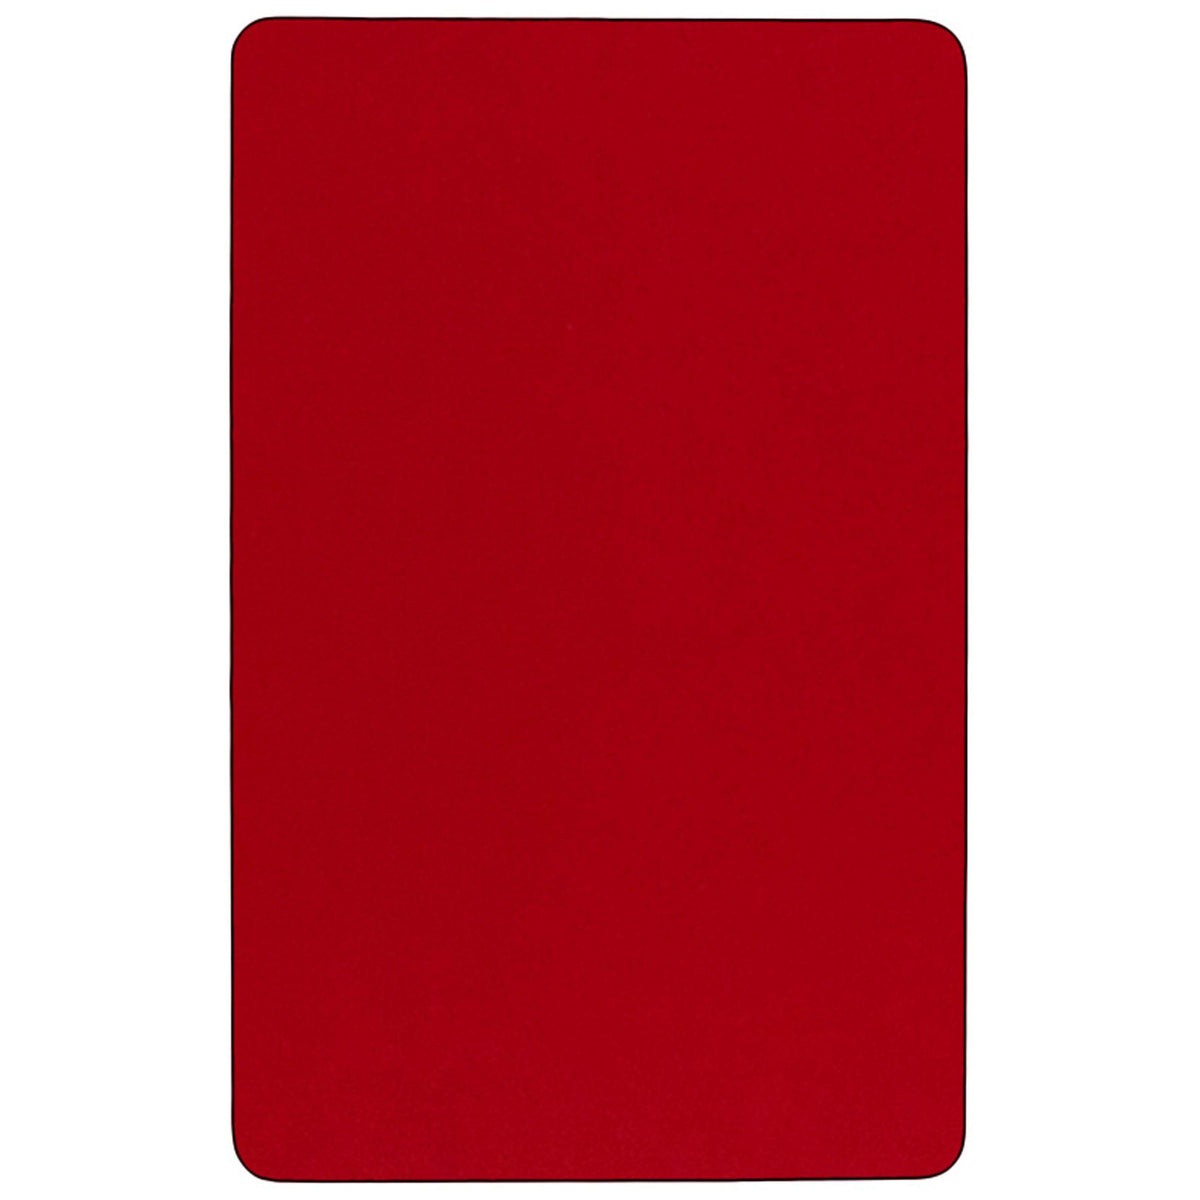 Red |#| Mobile 30inchW x 72inchL Rectangular Red Thermal Laminate Adjustable Activity Table